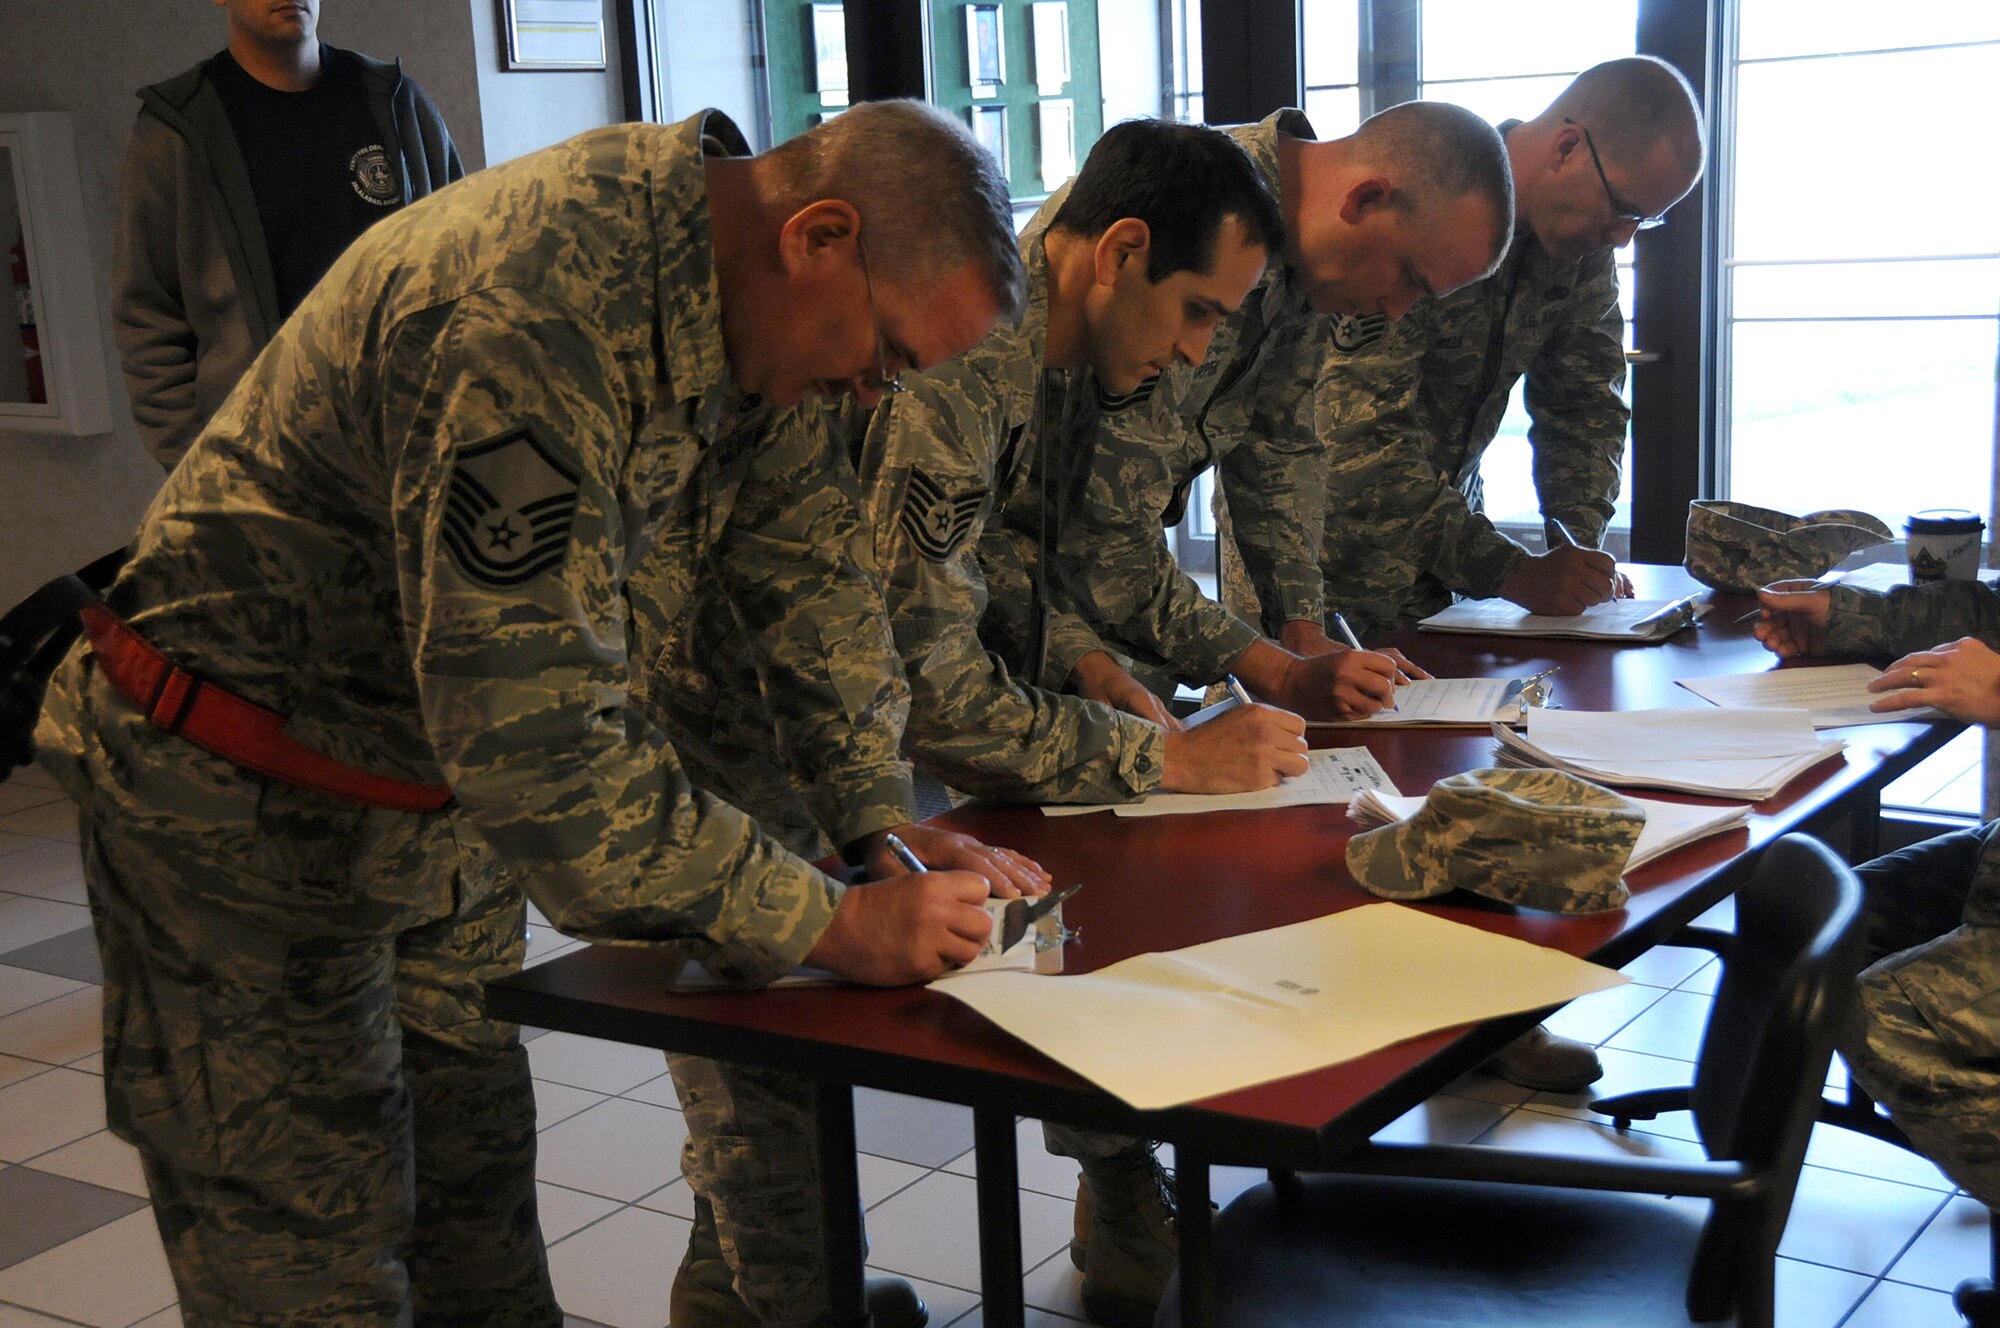 Airmen from the 192nd Fighter Wing fill out paperwork before receiving their vaccines for Hepatitis B at Joint Base Langley-Eustis, April 27, 2014. The 192nd Medical Group conducted the mass vaccination for Hepatitis to ensure airmen are healthy and fit to complete their missions in the Air Guard. (U.S. Air National Guard photo by Airman 1st Class Johnisa B. Roberts/Released)

